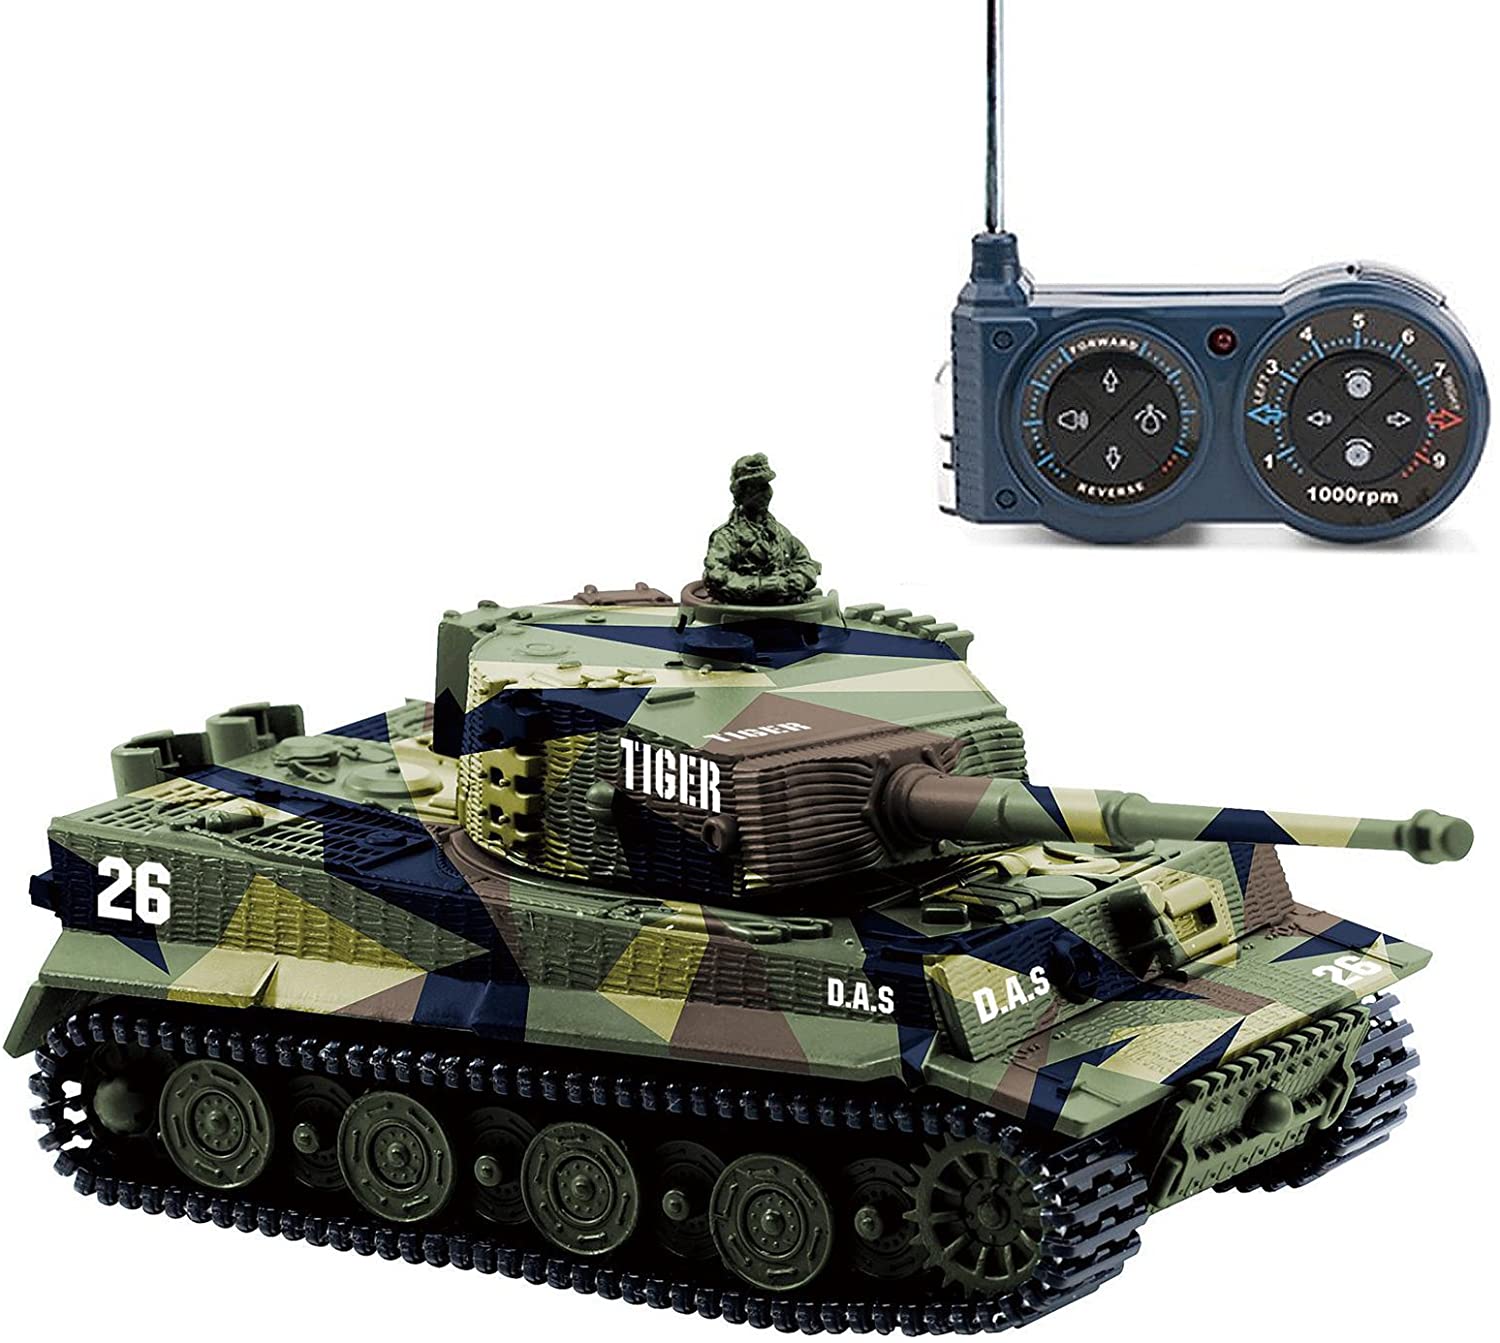 UimimiU Hand Control RC Play Against Tank RC BB Panzer Tank Radio Remote Control Tank For Boy Model Toys That Launchs BB Bullets Adults Boys Girls Hobby Toy Birthday Gifts